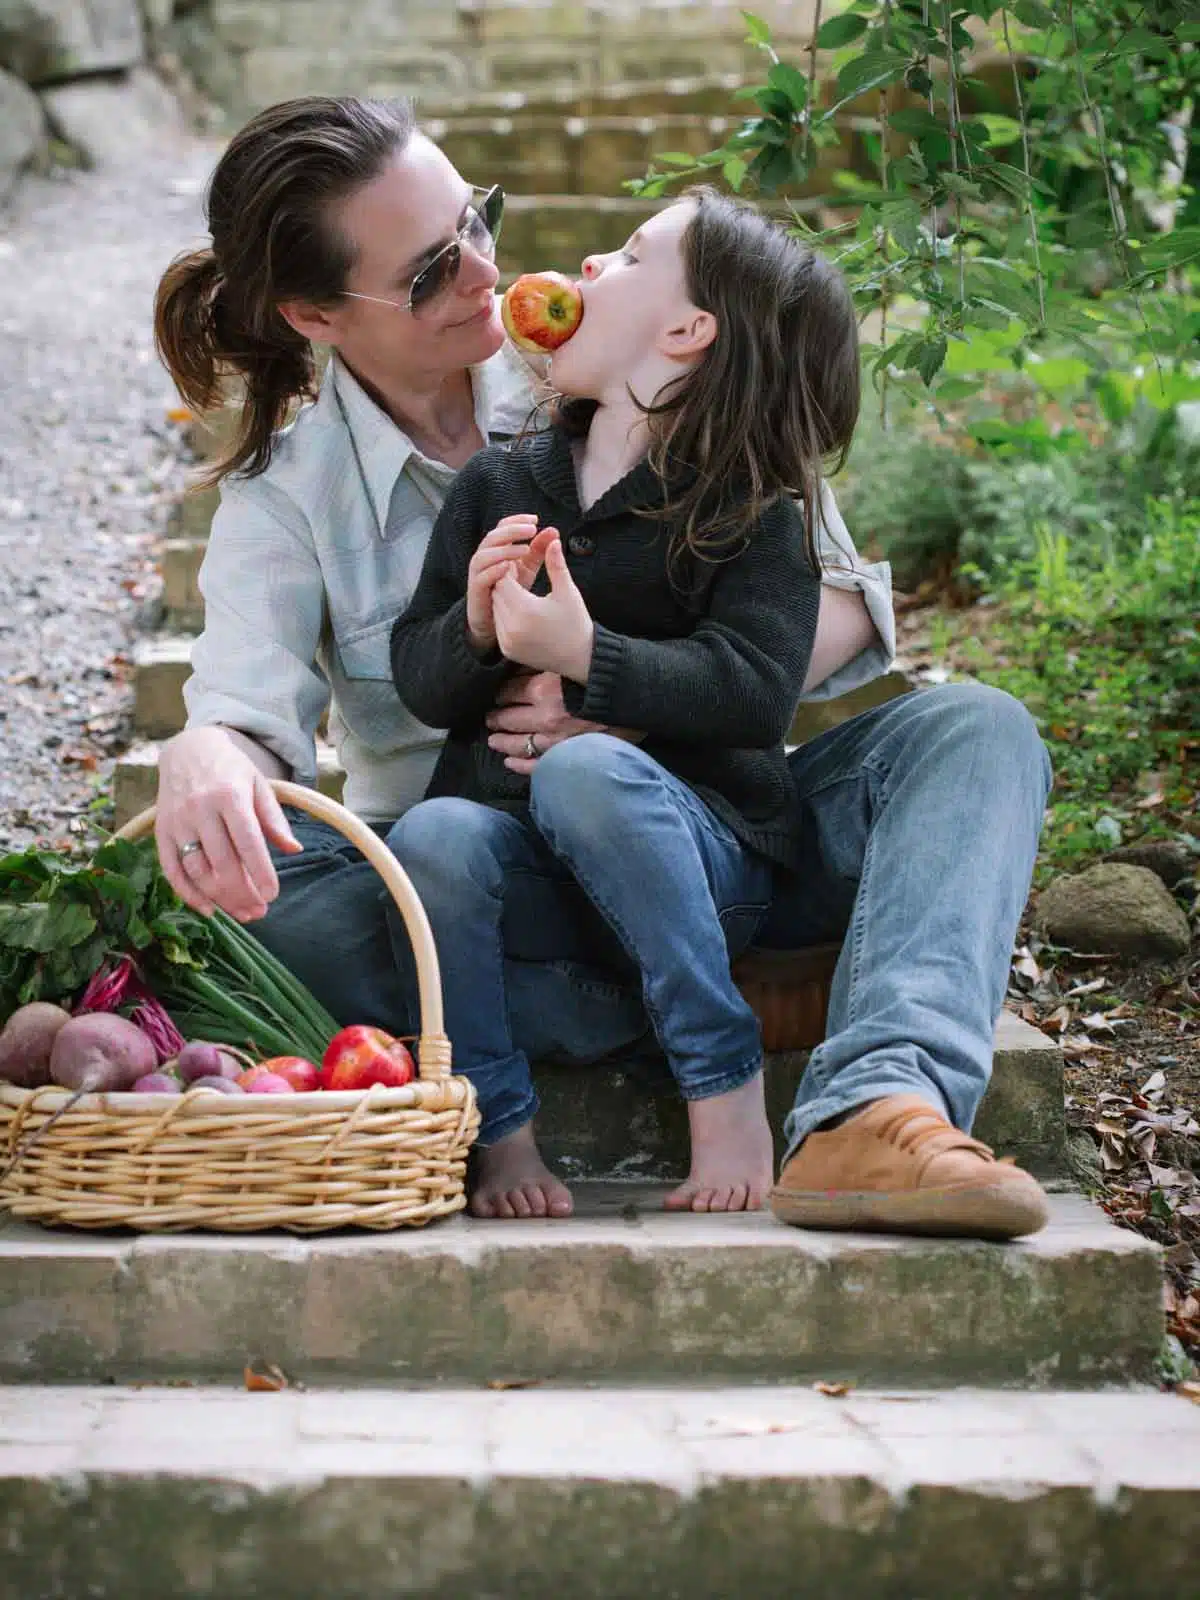 A woman and a child sitting on a step with food.